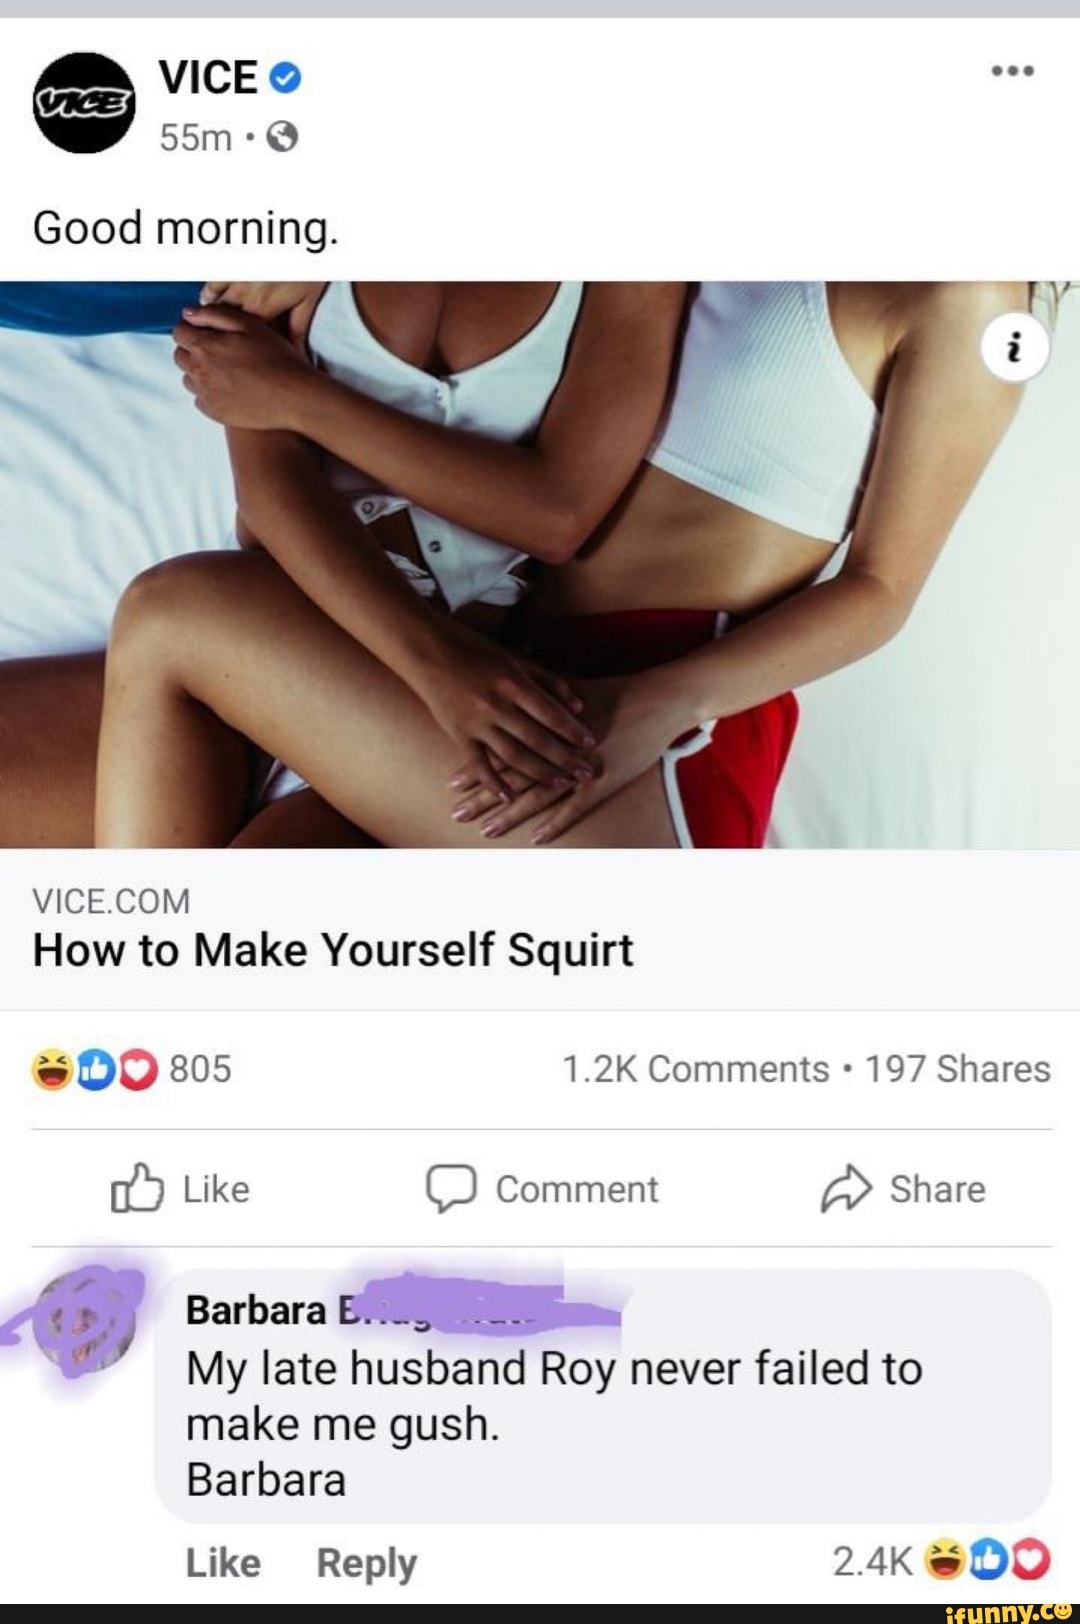 amy younker recommends how to make your self squirt pic